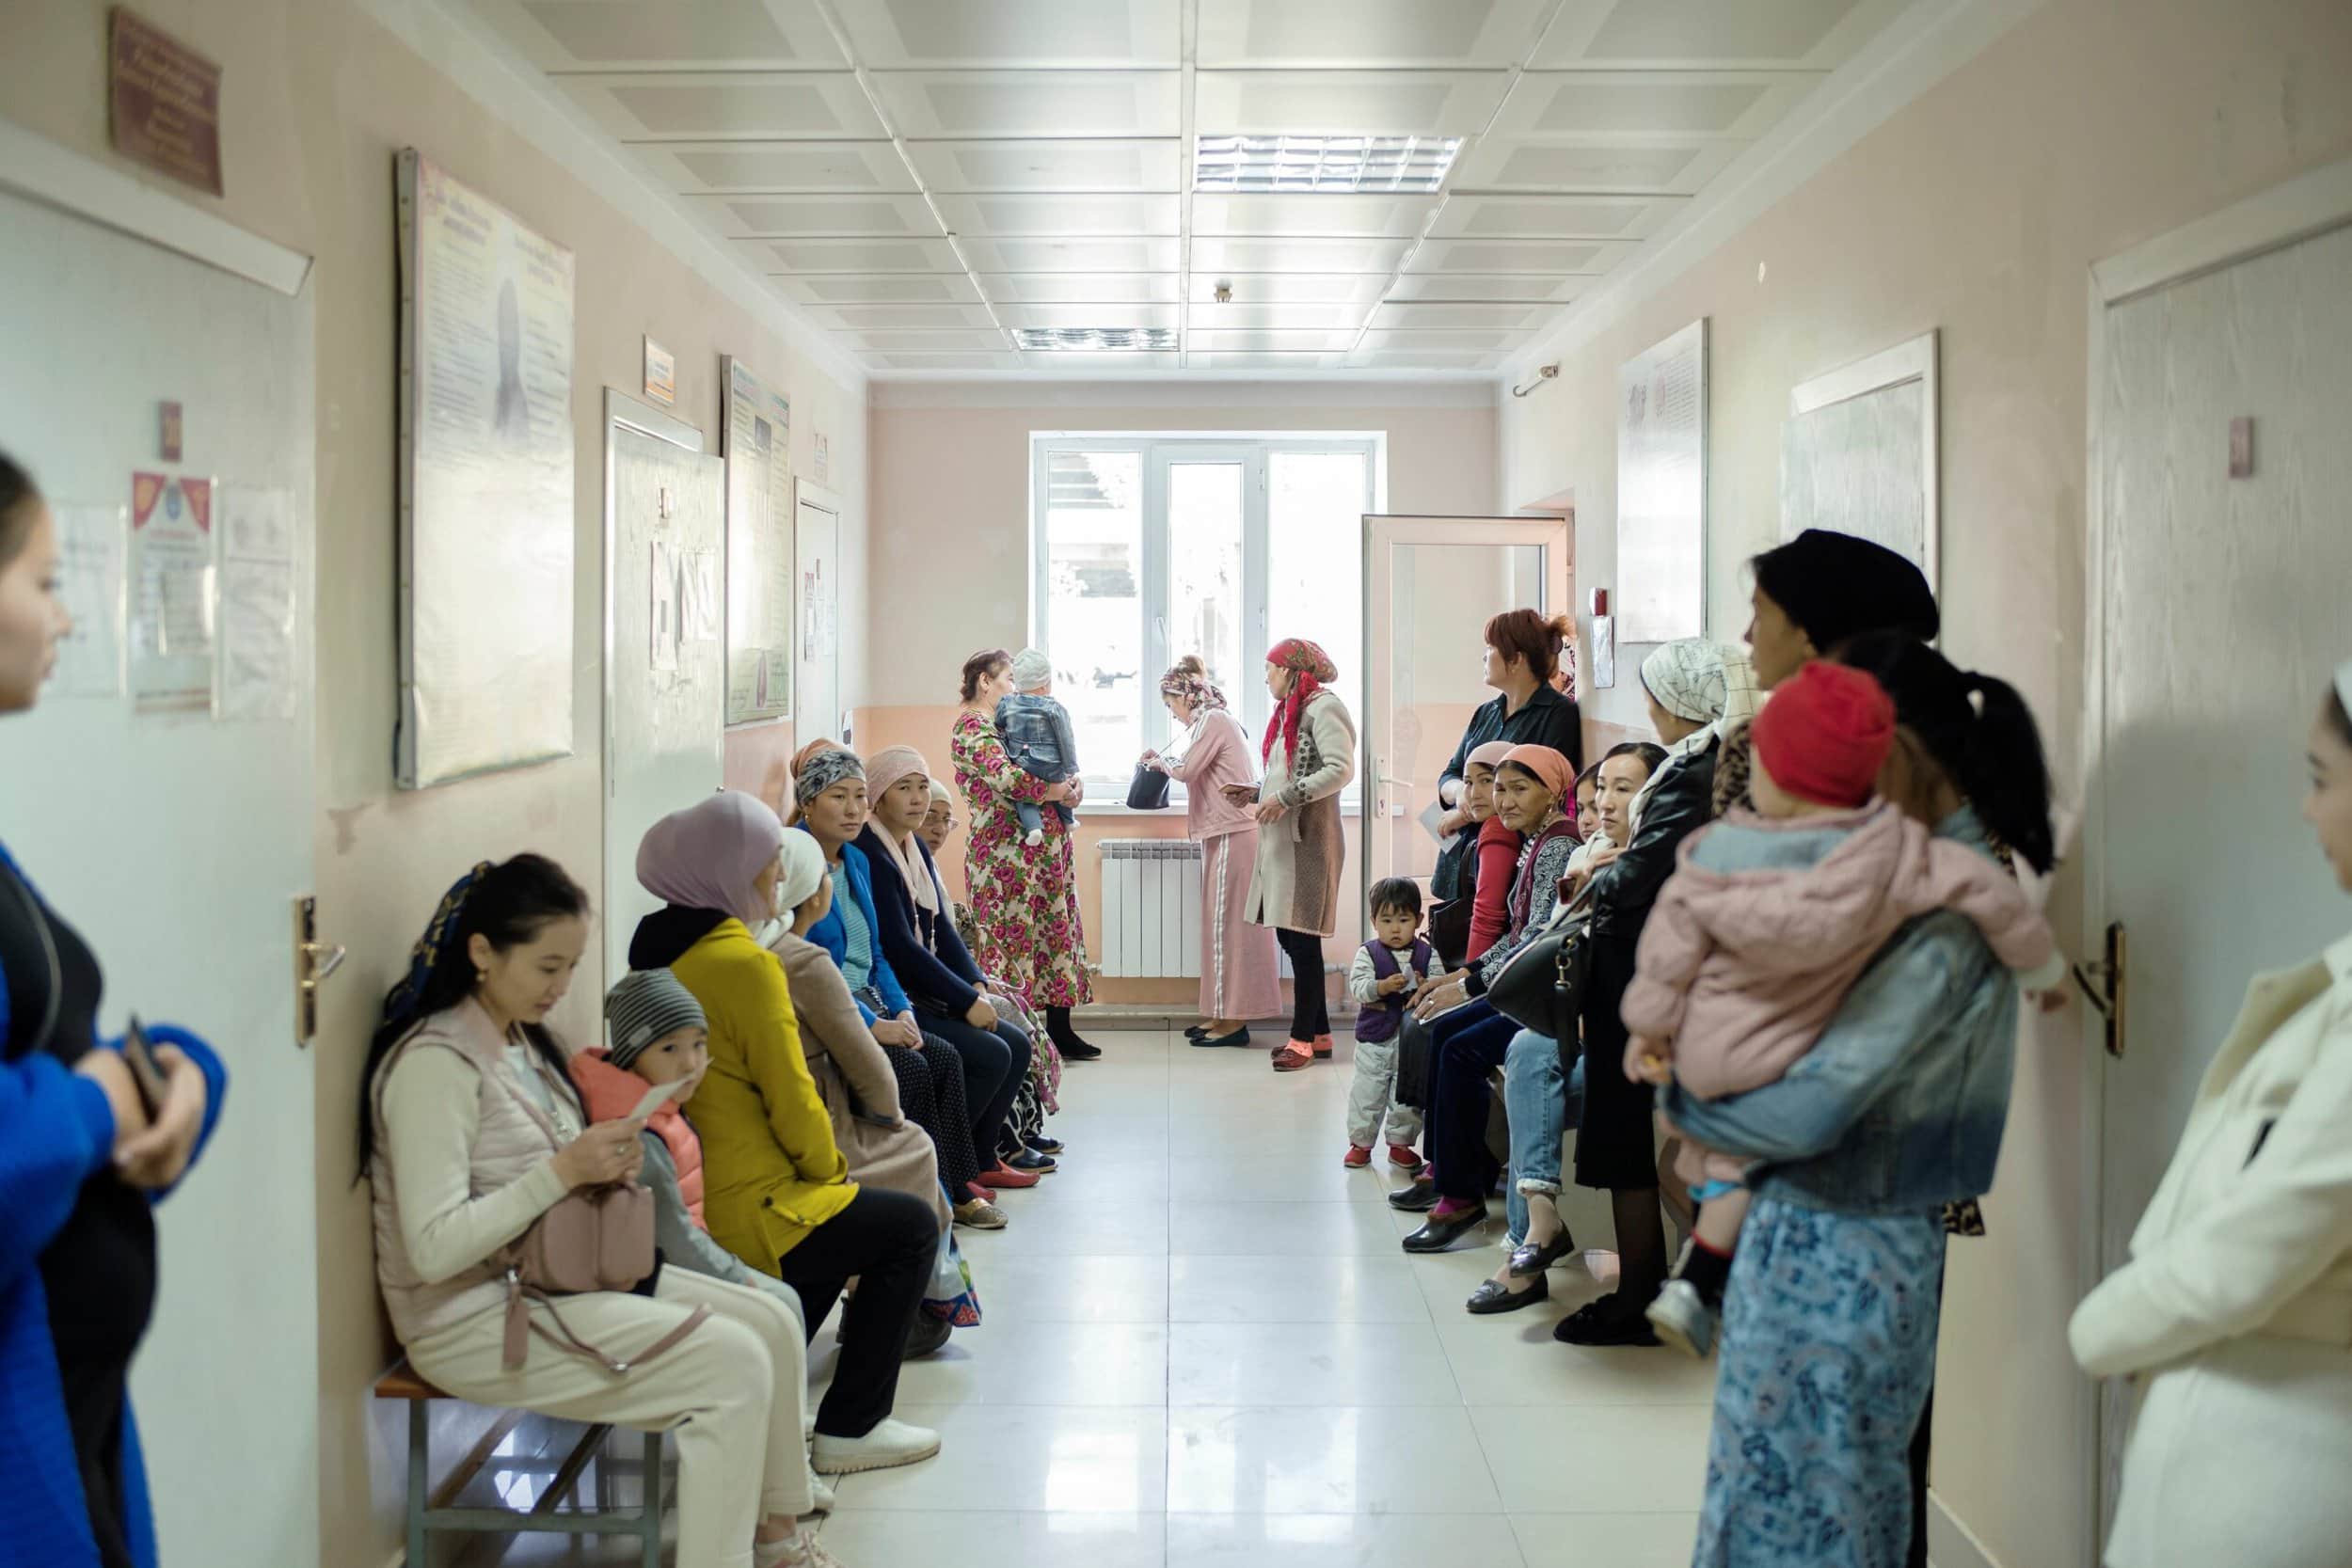 Getting Kyrgyz women the antenatal care they’re entitled to: Closing the gap between paper and practice